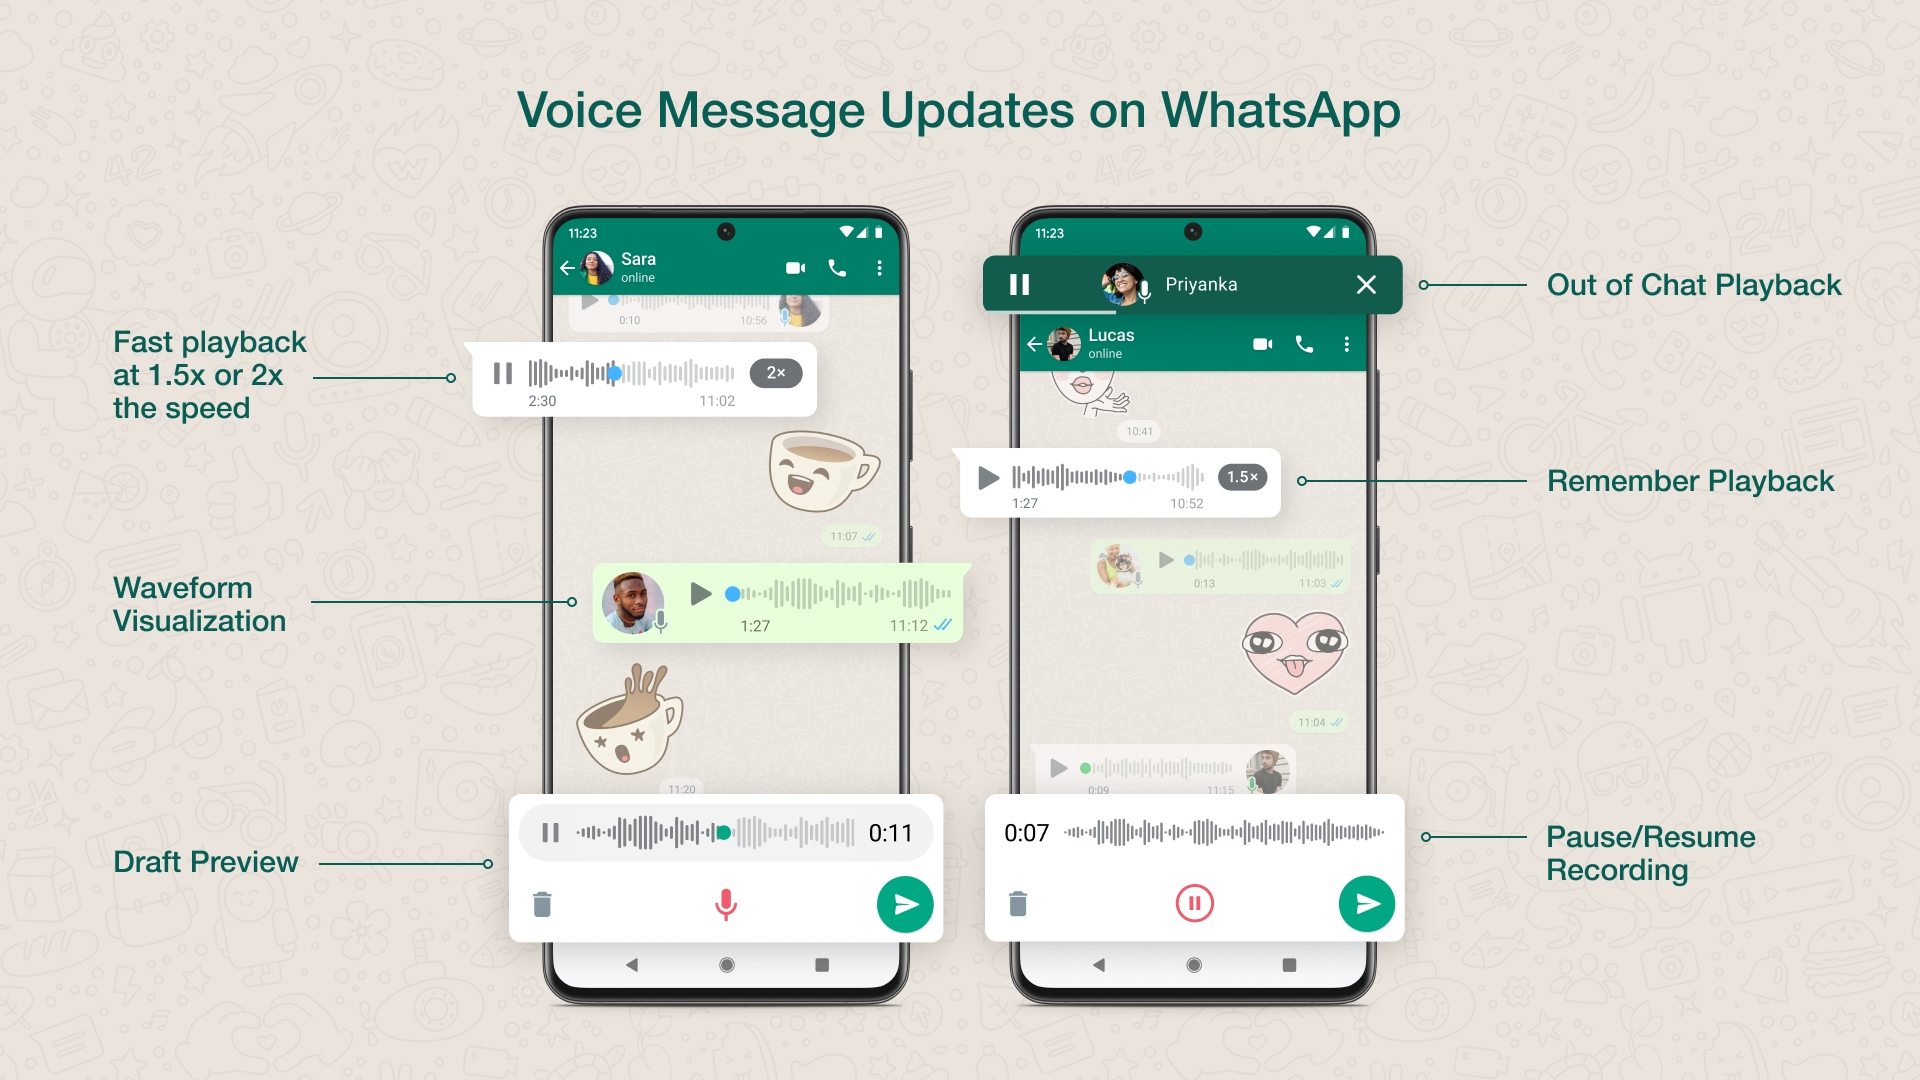 WhatsApp's New Voice Message Feature